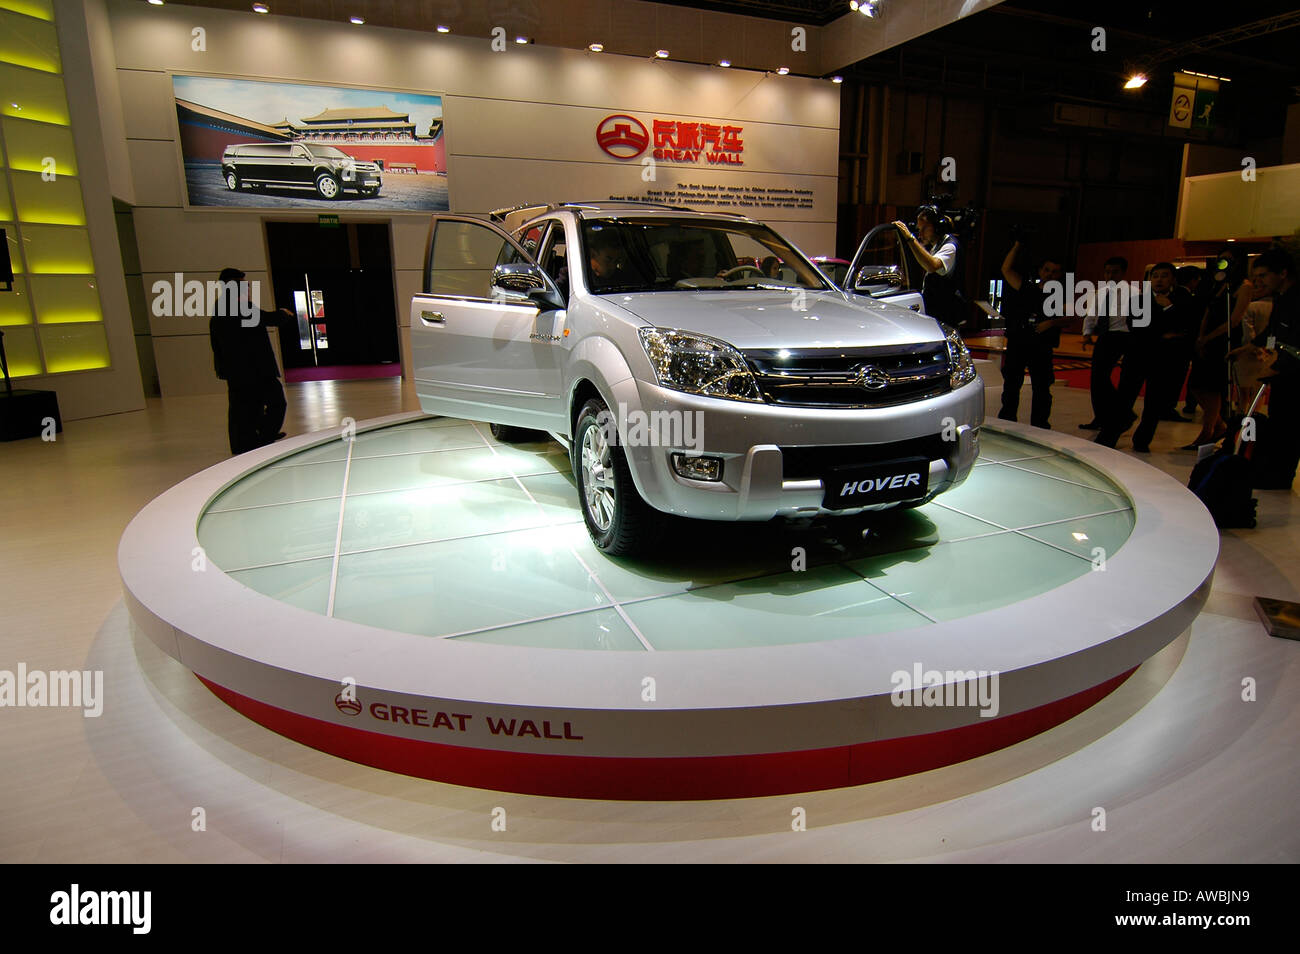 New Chinese 4wd car, from the Chinese 'Great Wall' maker, exhibited at the Paris International Auto Show. Stock Photo